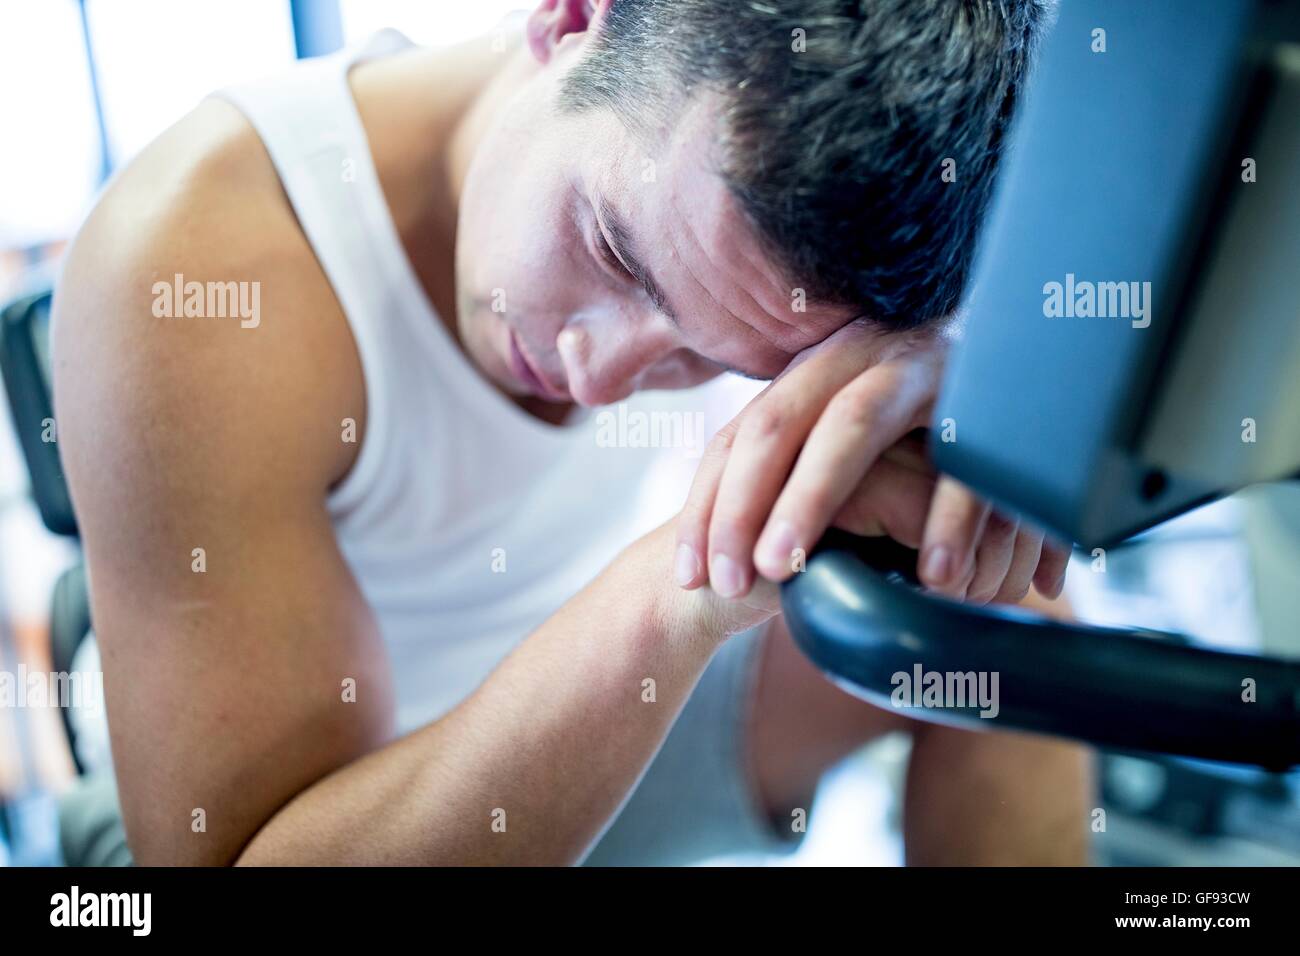 PROPERTY RELEASED. MODEL RELEASED. Close-up of young man resting his head on exercise machine in gym. Stock Photo